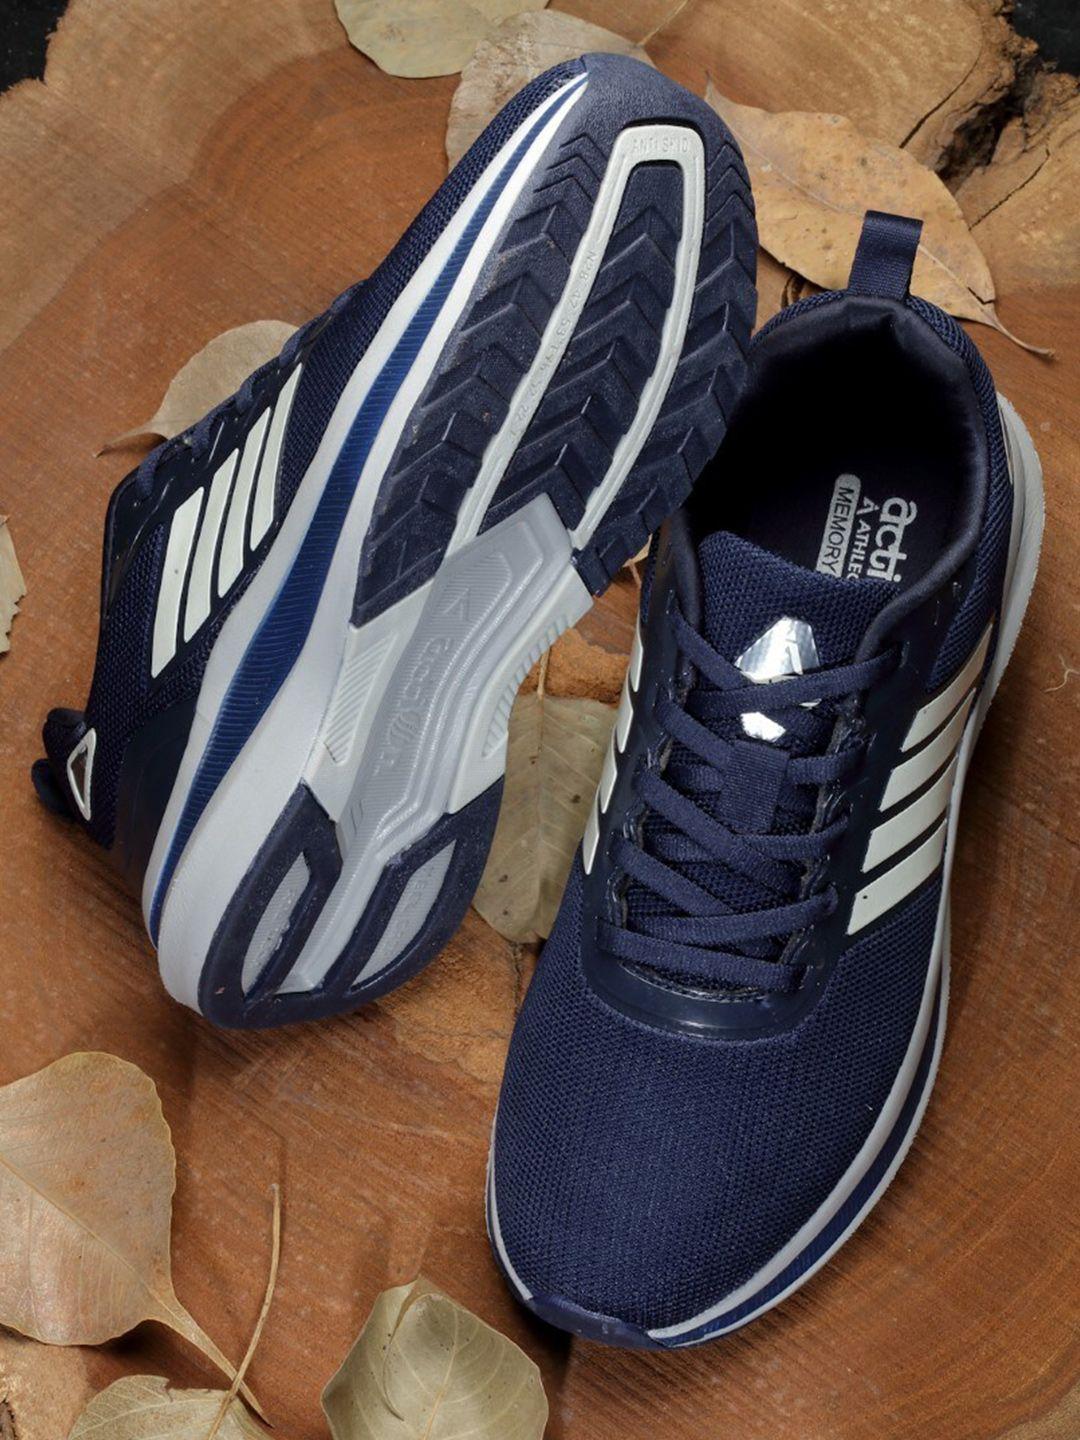 action men air max technology running shoes